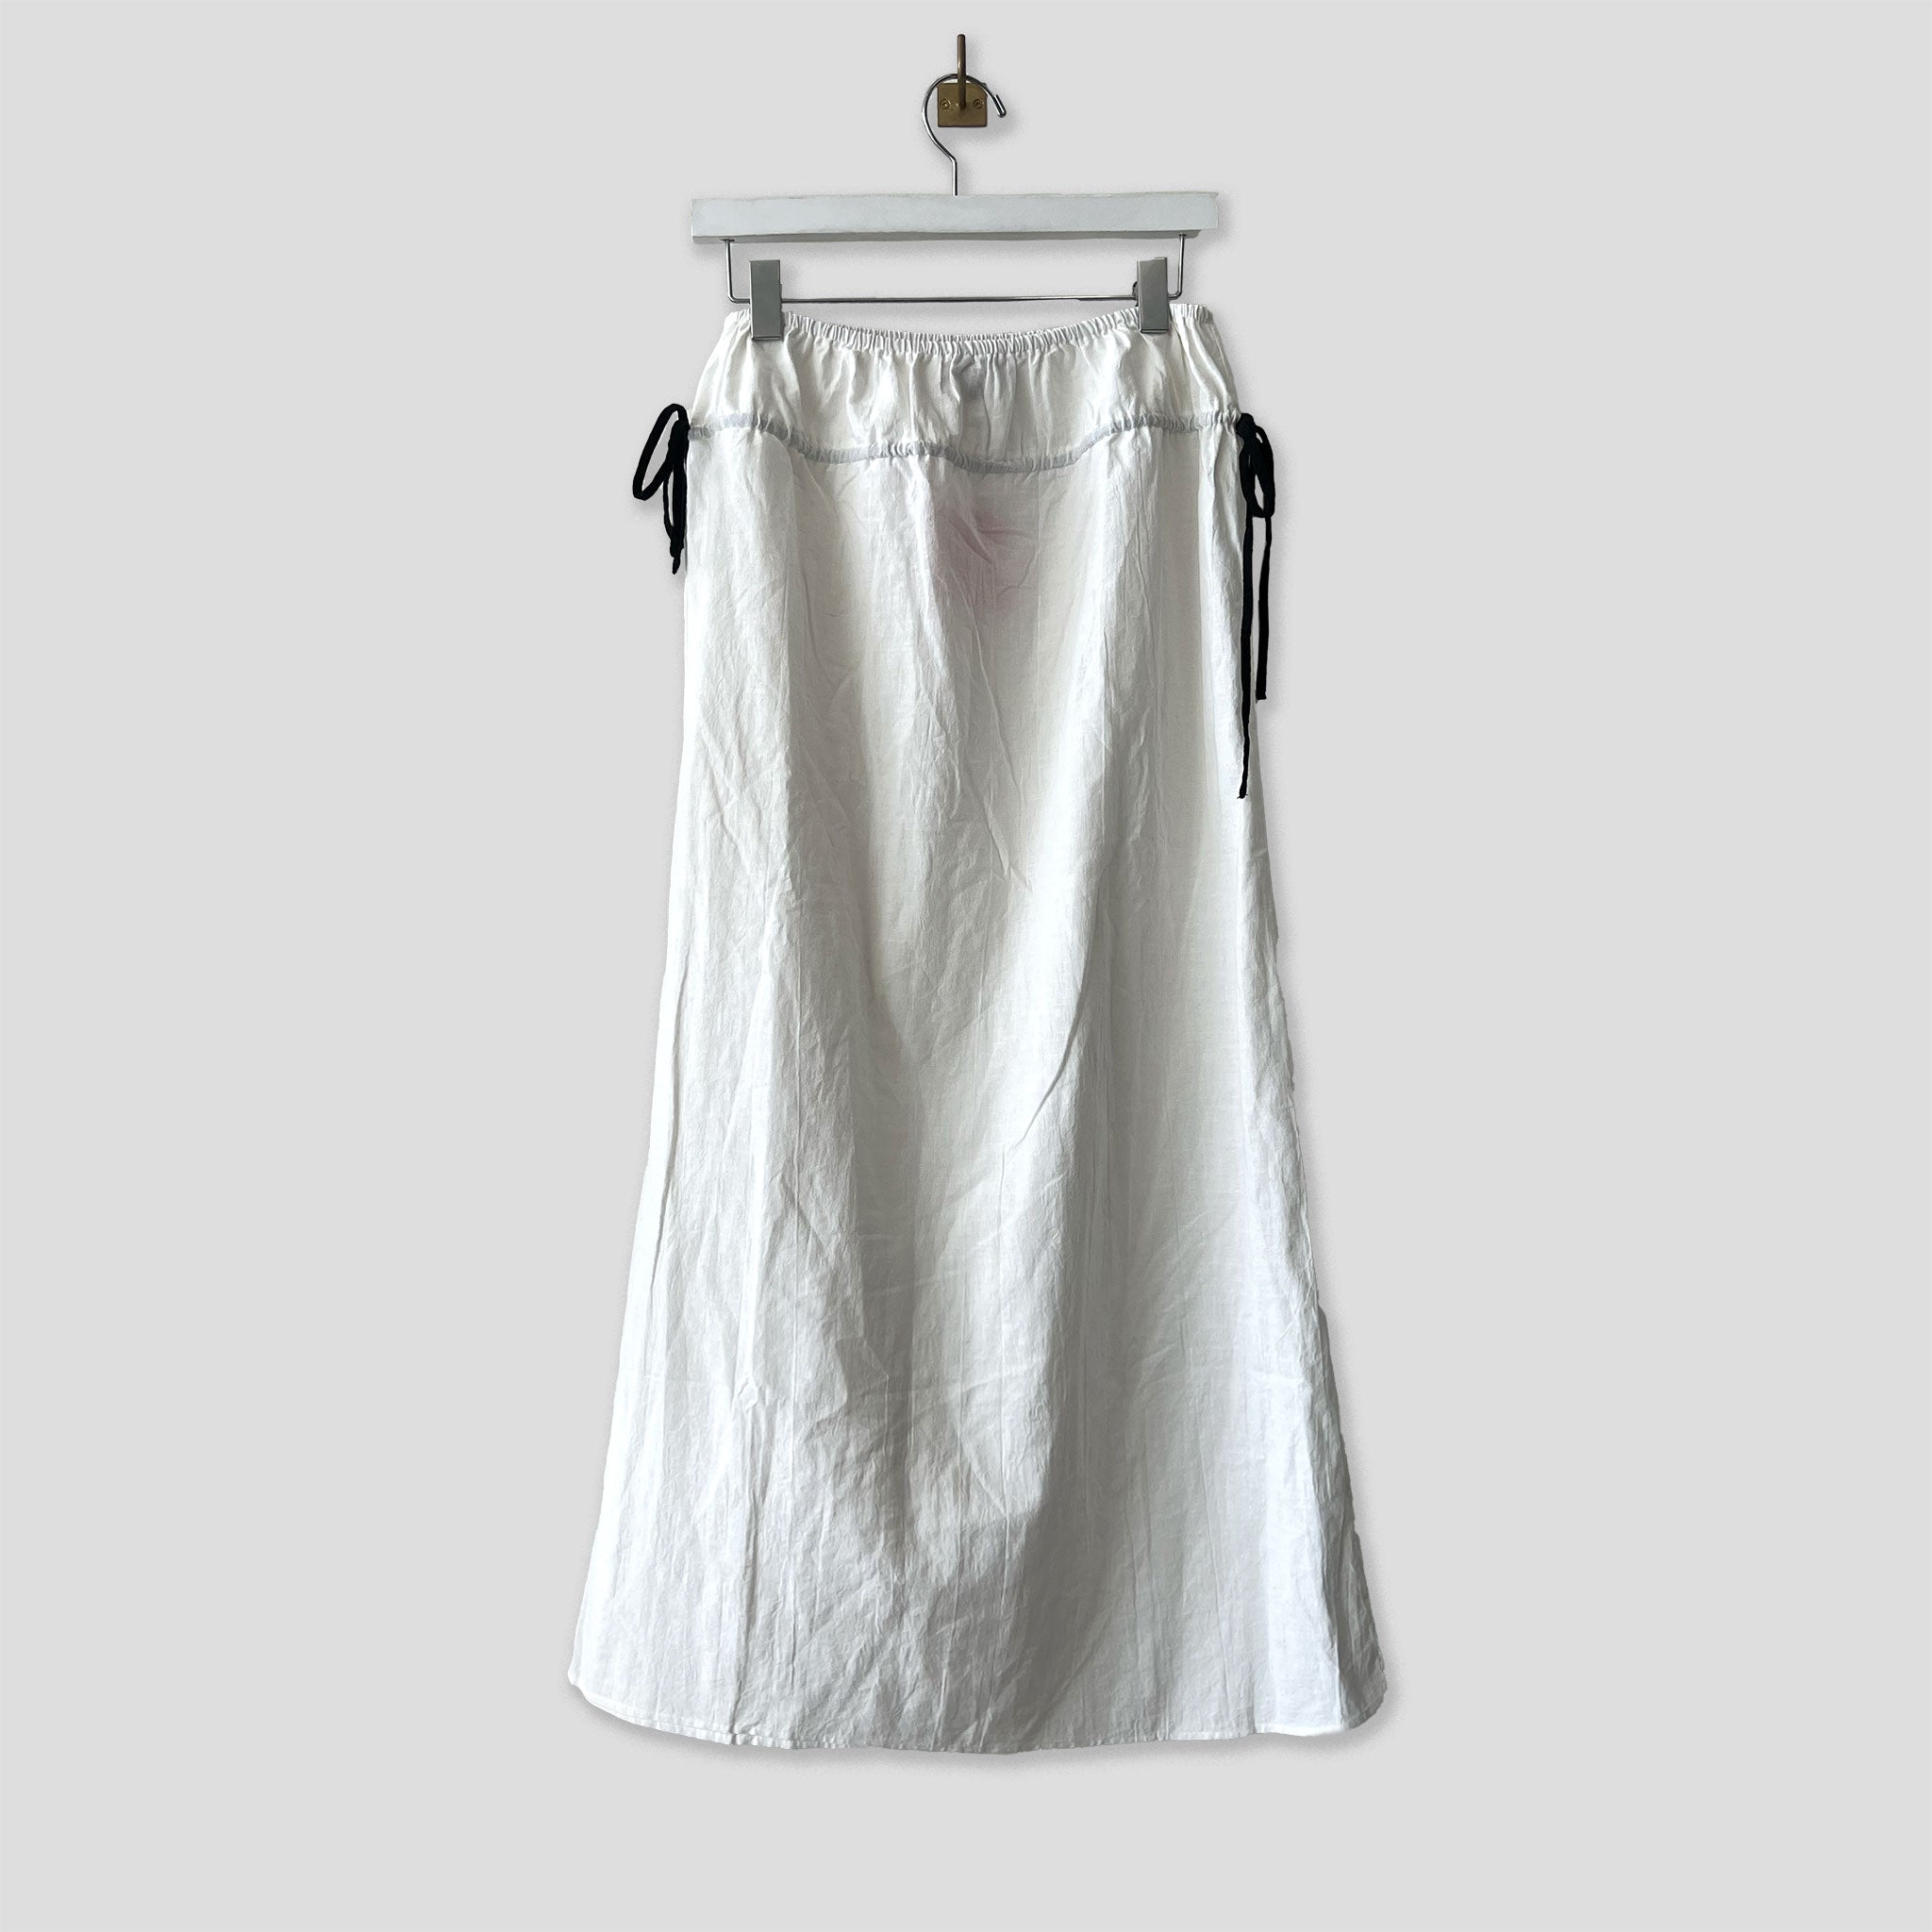 Hanging photo of the Cotton Side Ribbons Midi Skirt - White.